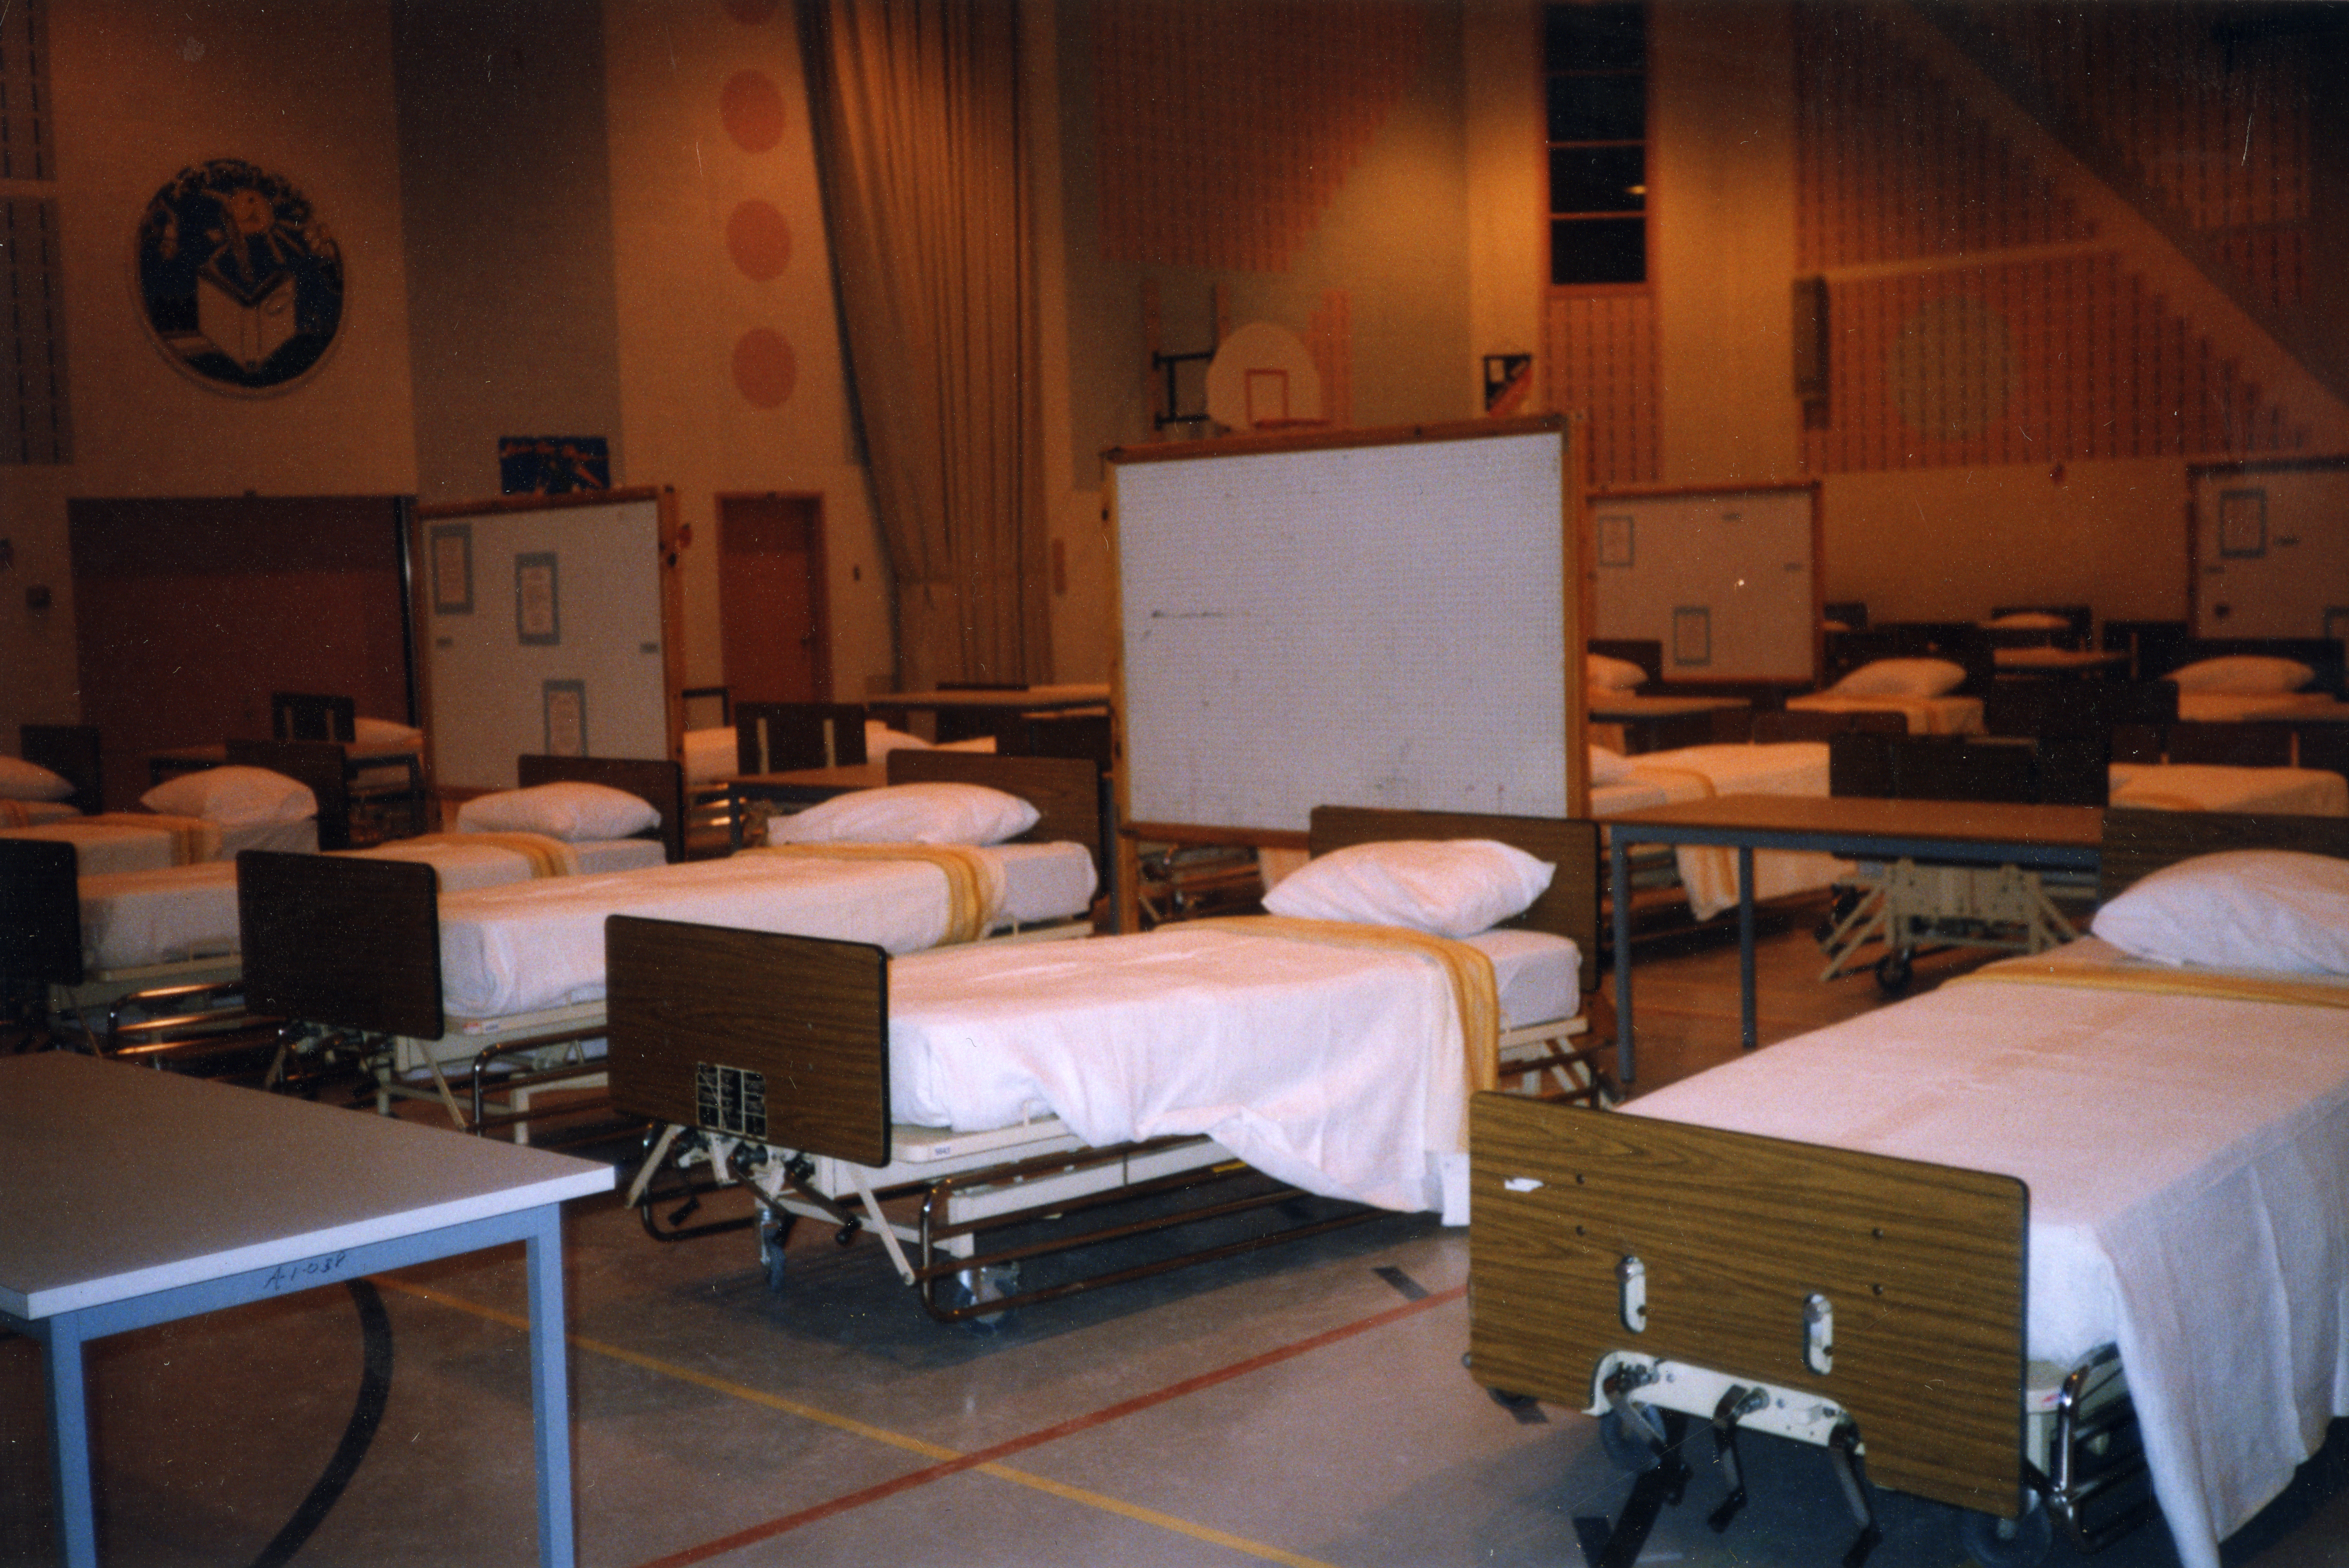 Beds placed in the gymnasium of the school, Des Prés-Verts to host victims of damaged households.